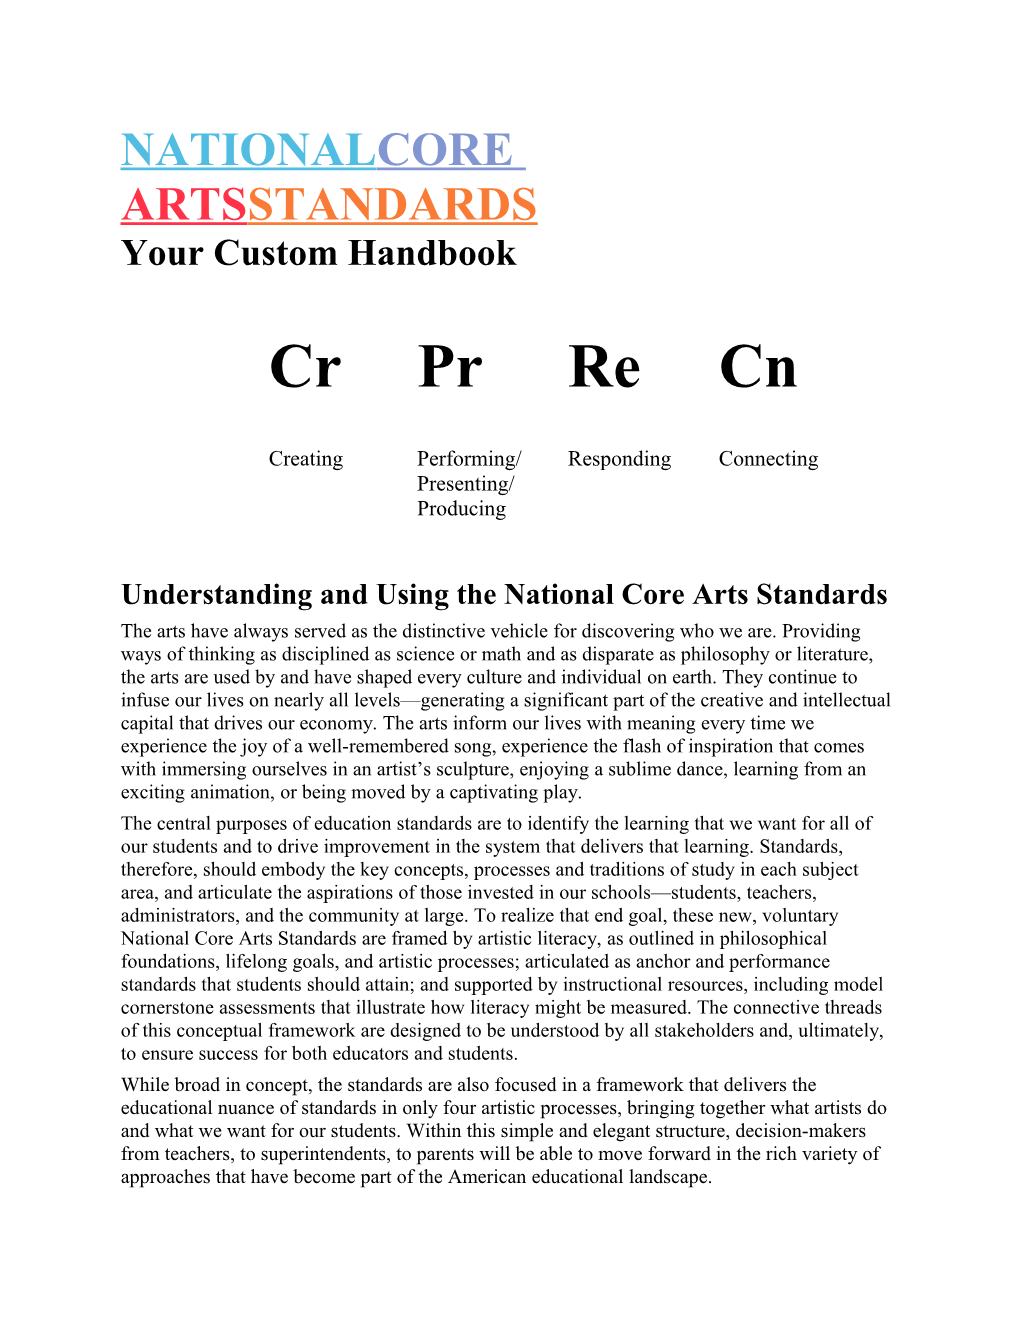 Understanding and Using the National Core Arts Standards